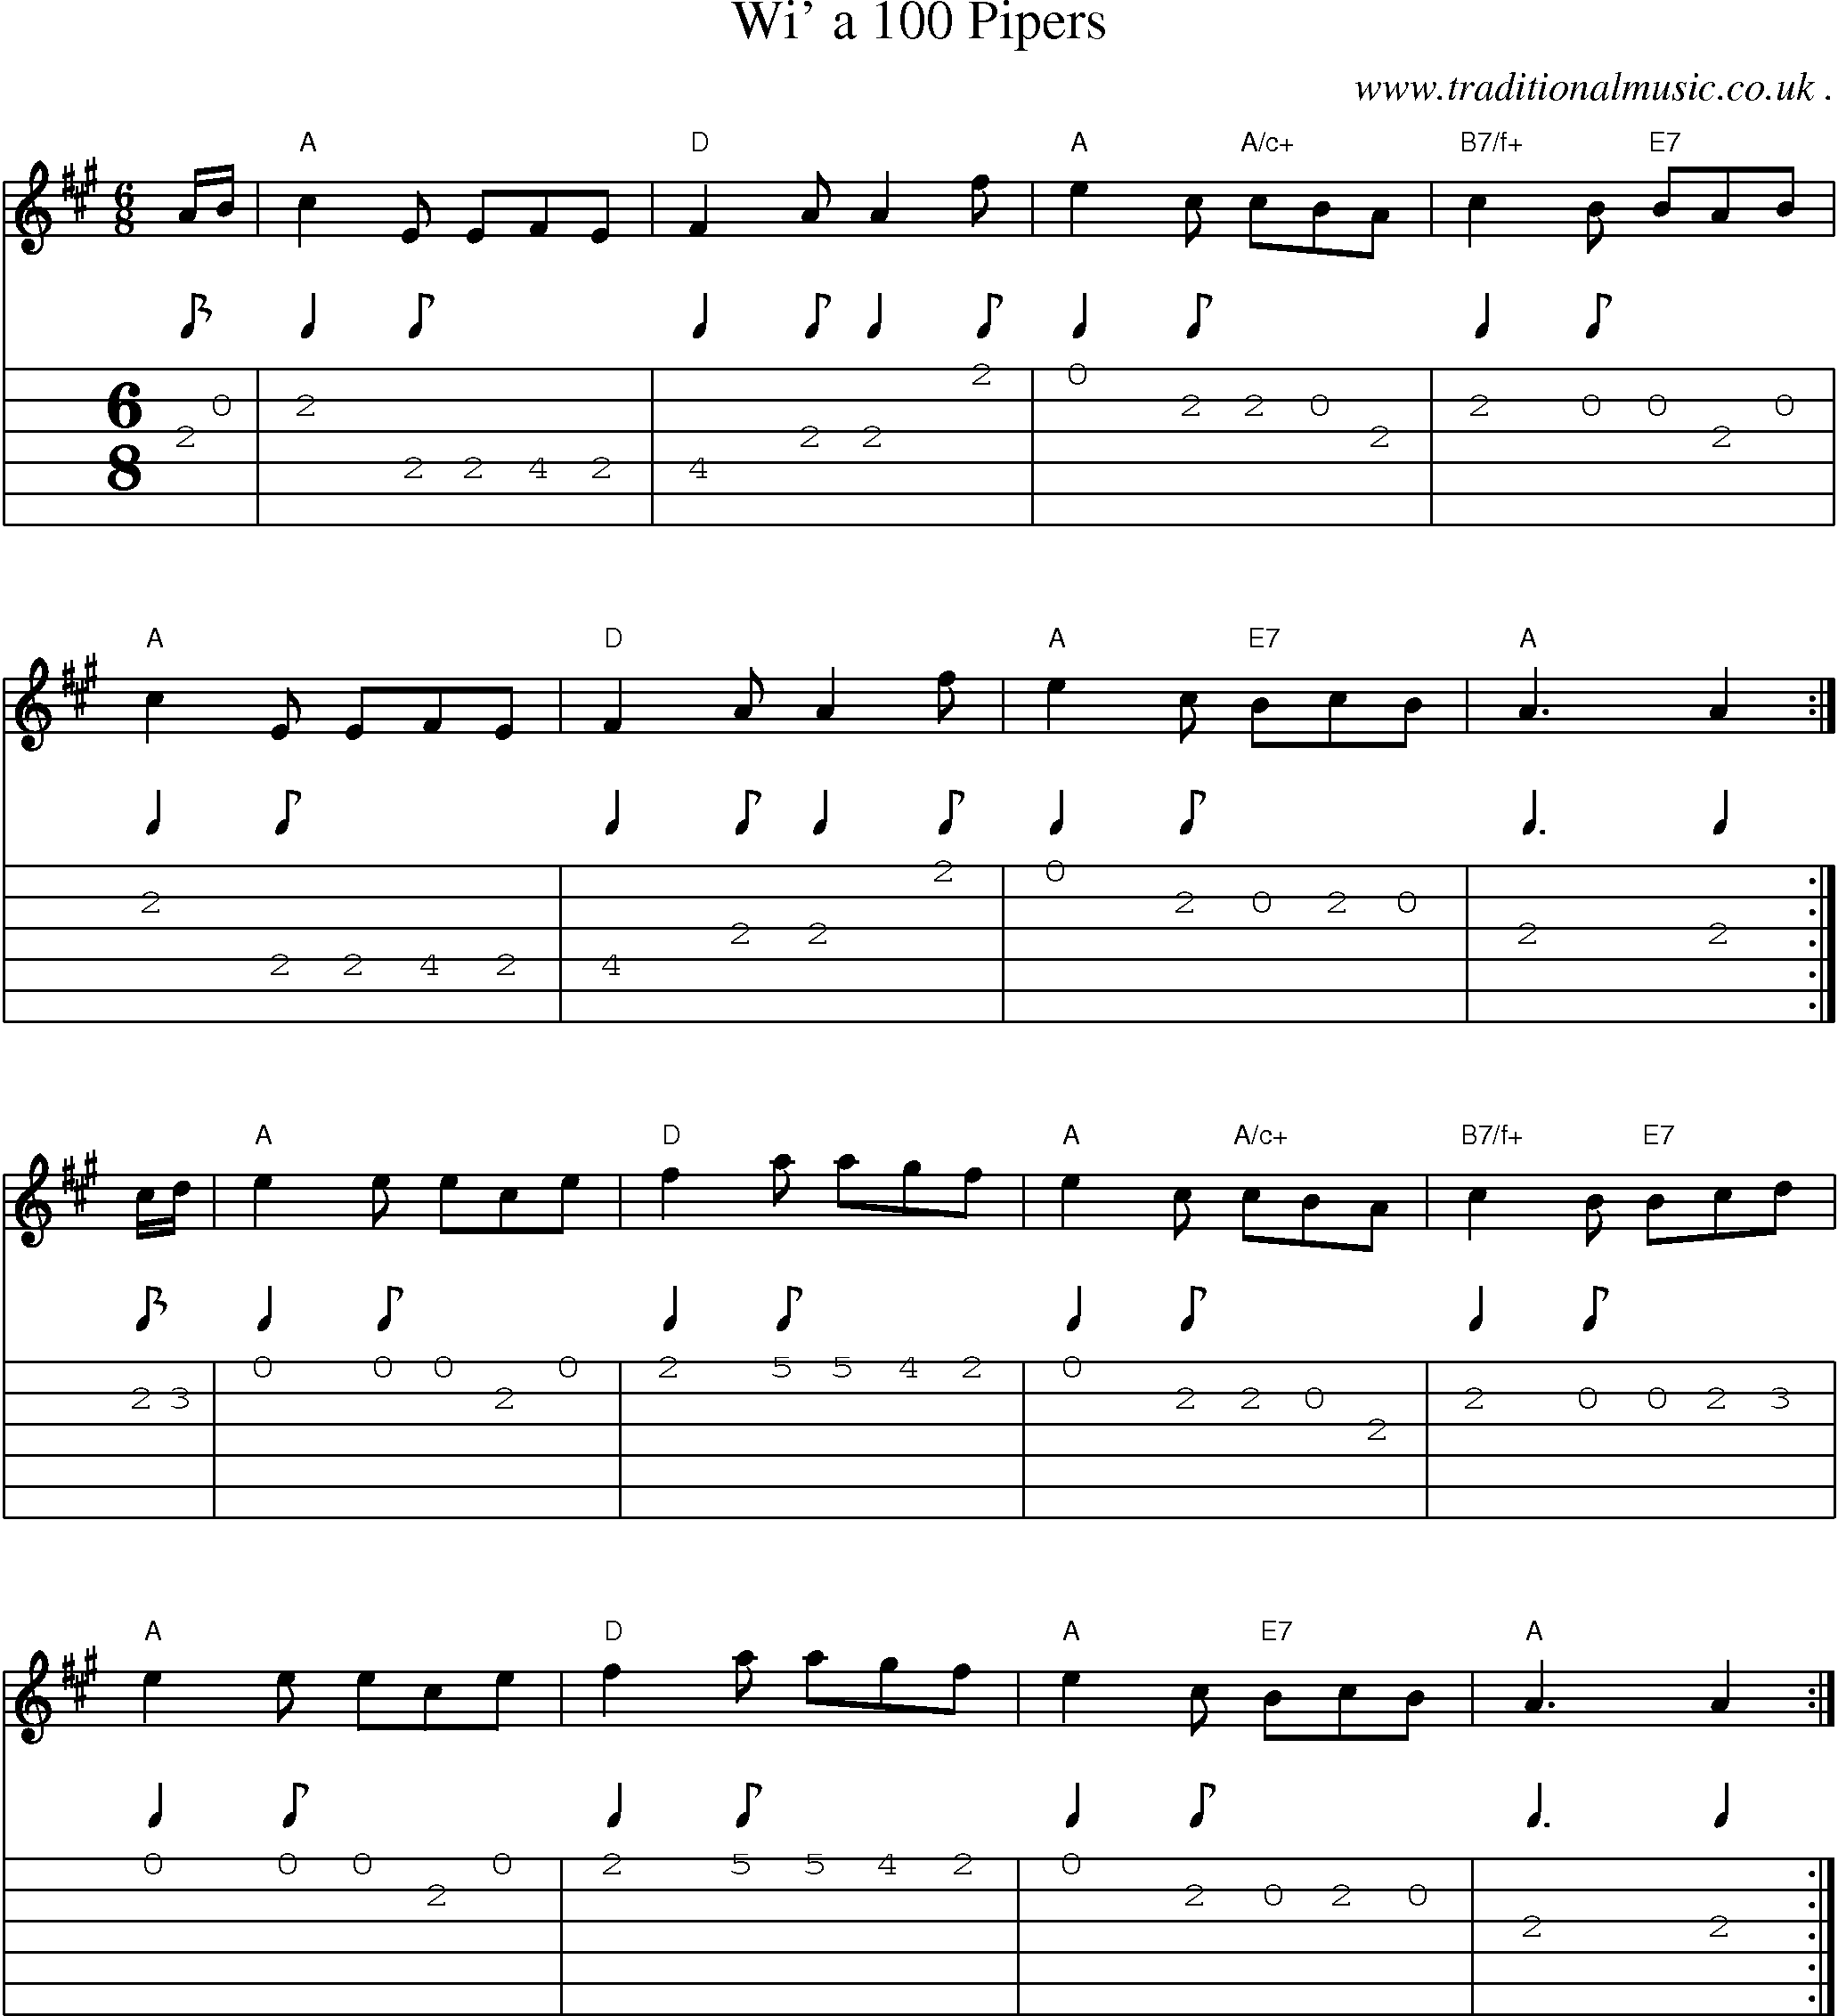 Sheet-music  score, Chords and Guitar Tabs for Wi A 100 Pipers